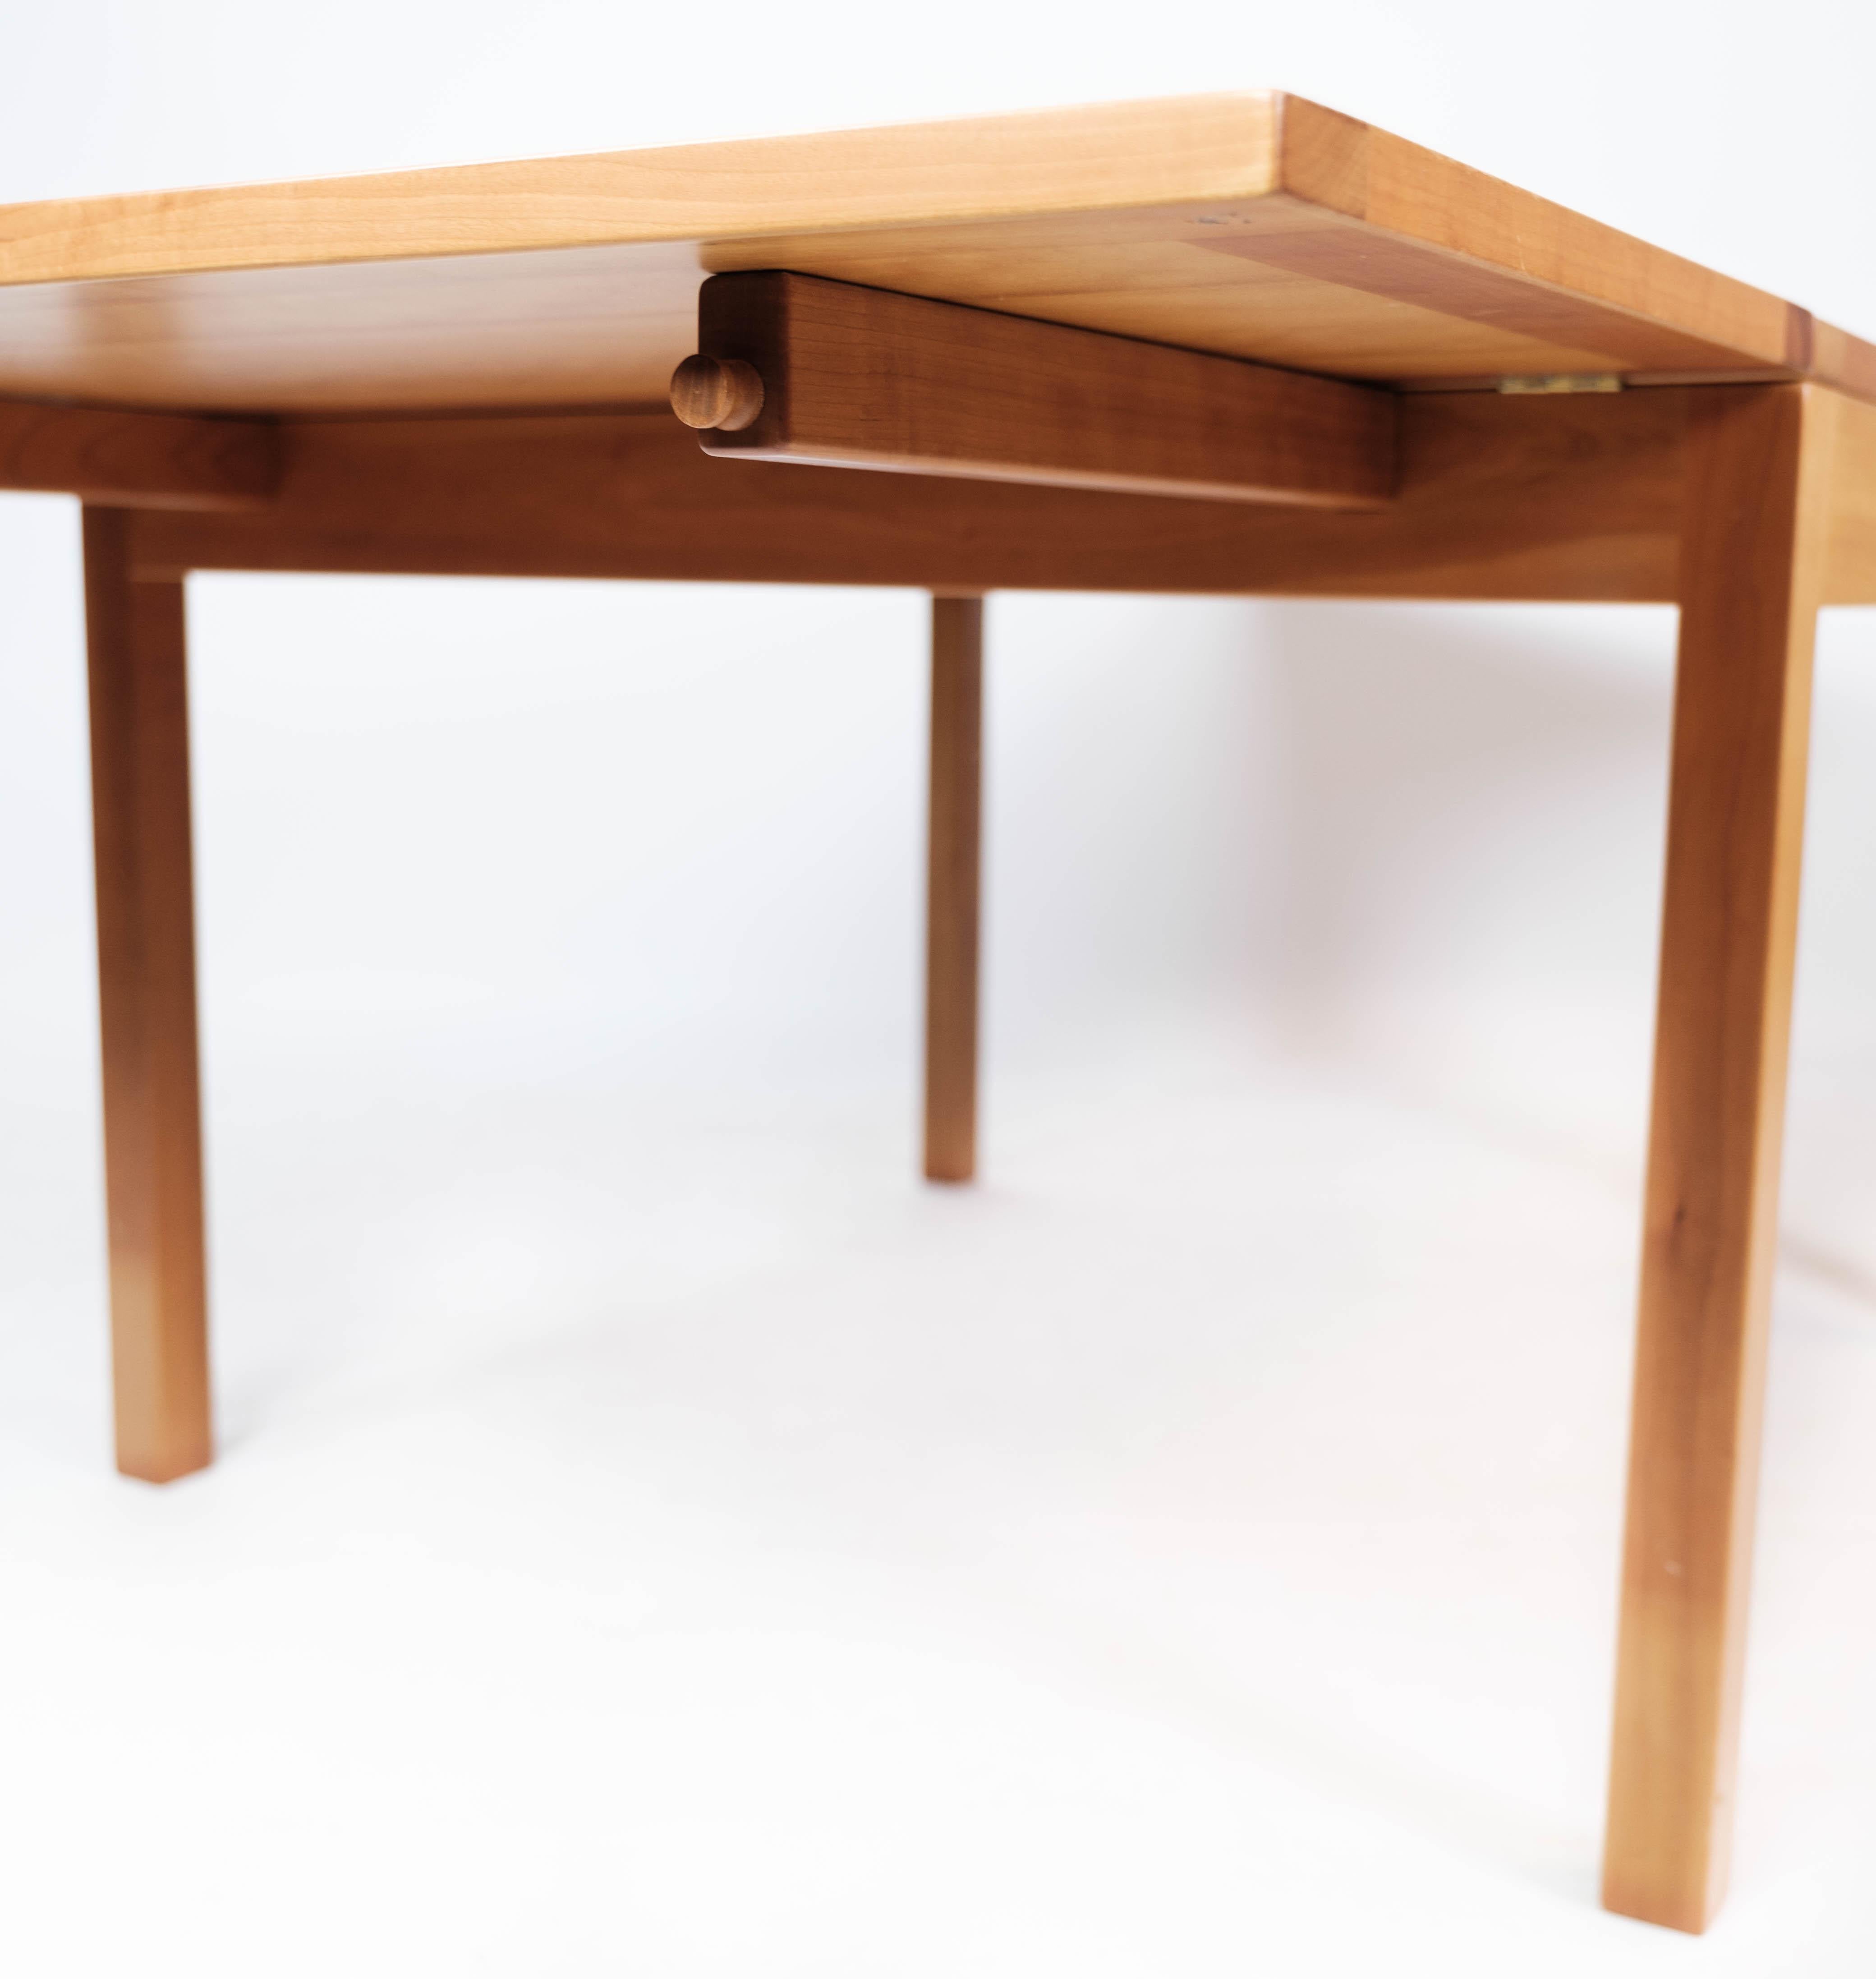 Coffee Table in Rosewood with Shelf, of Danish Design from the 1960s 2